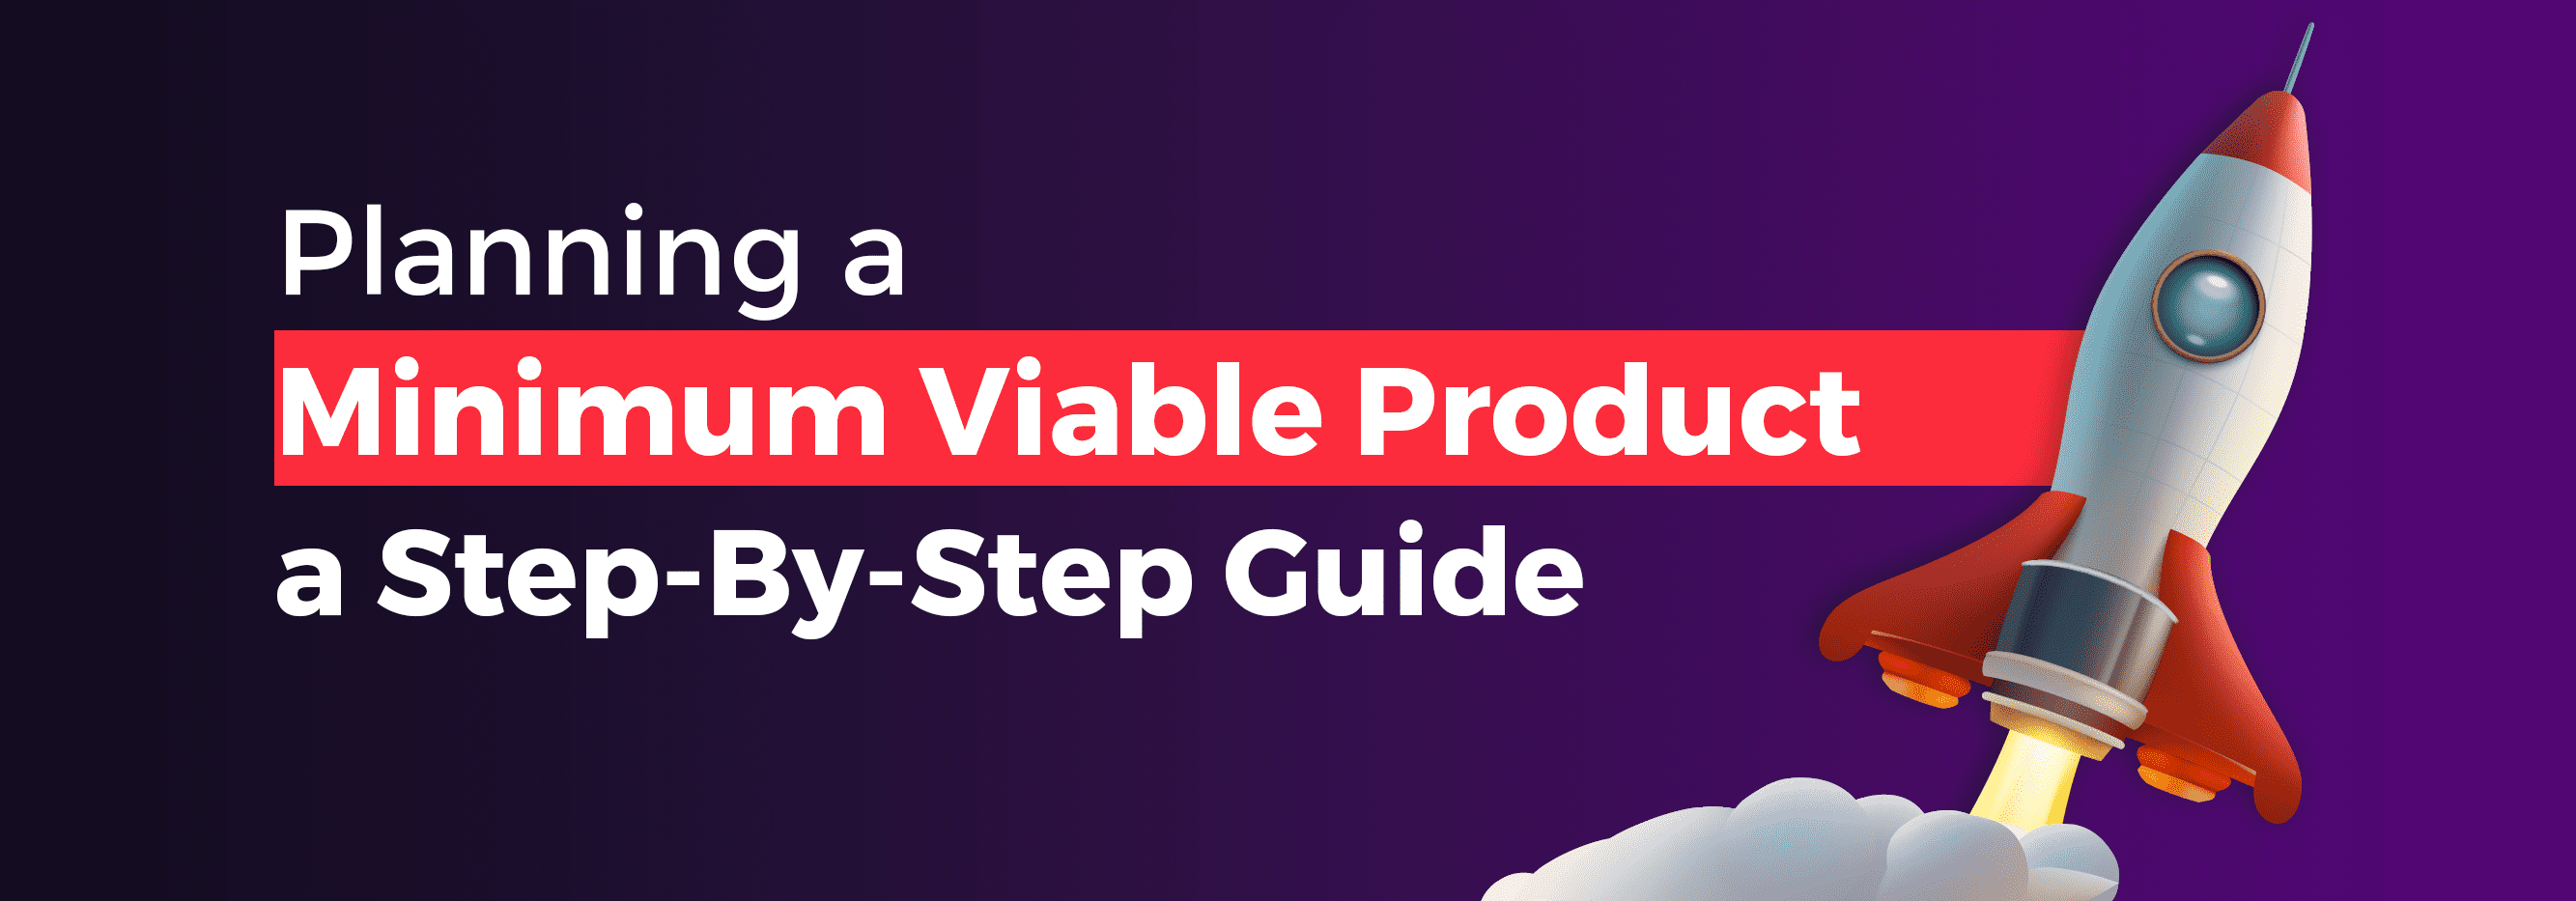 Planning a Minimum Viable Product a Step-By-Step Guide_banner